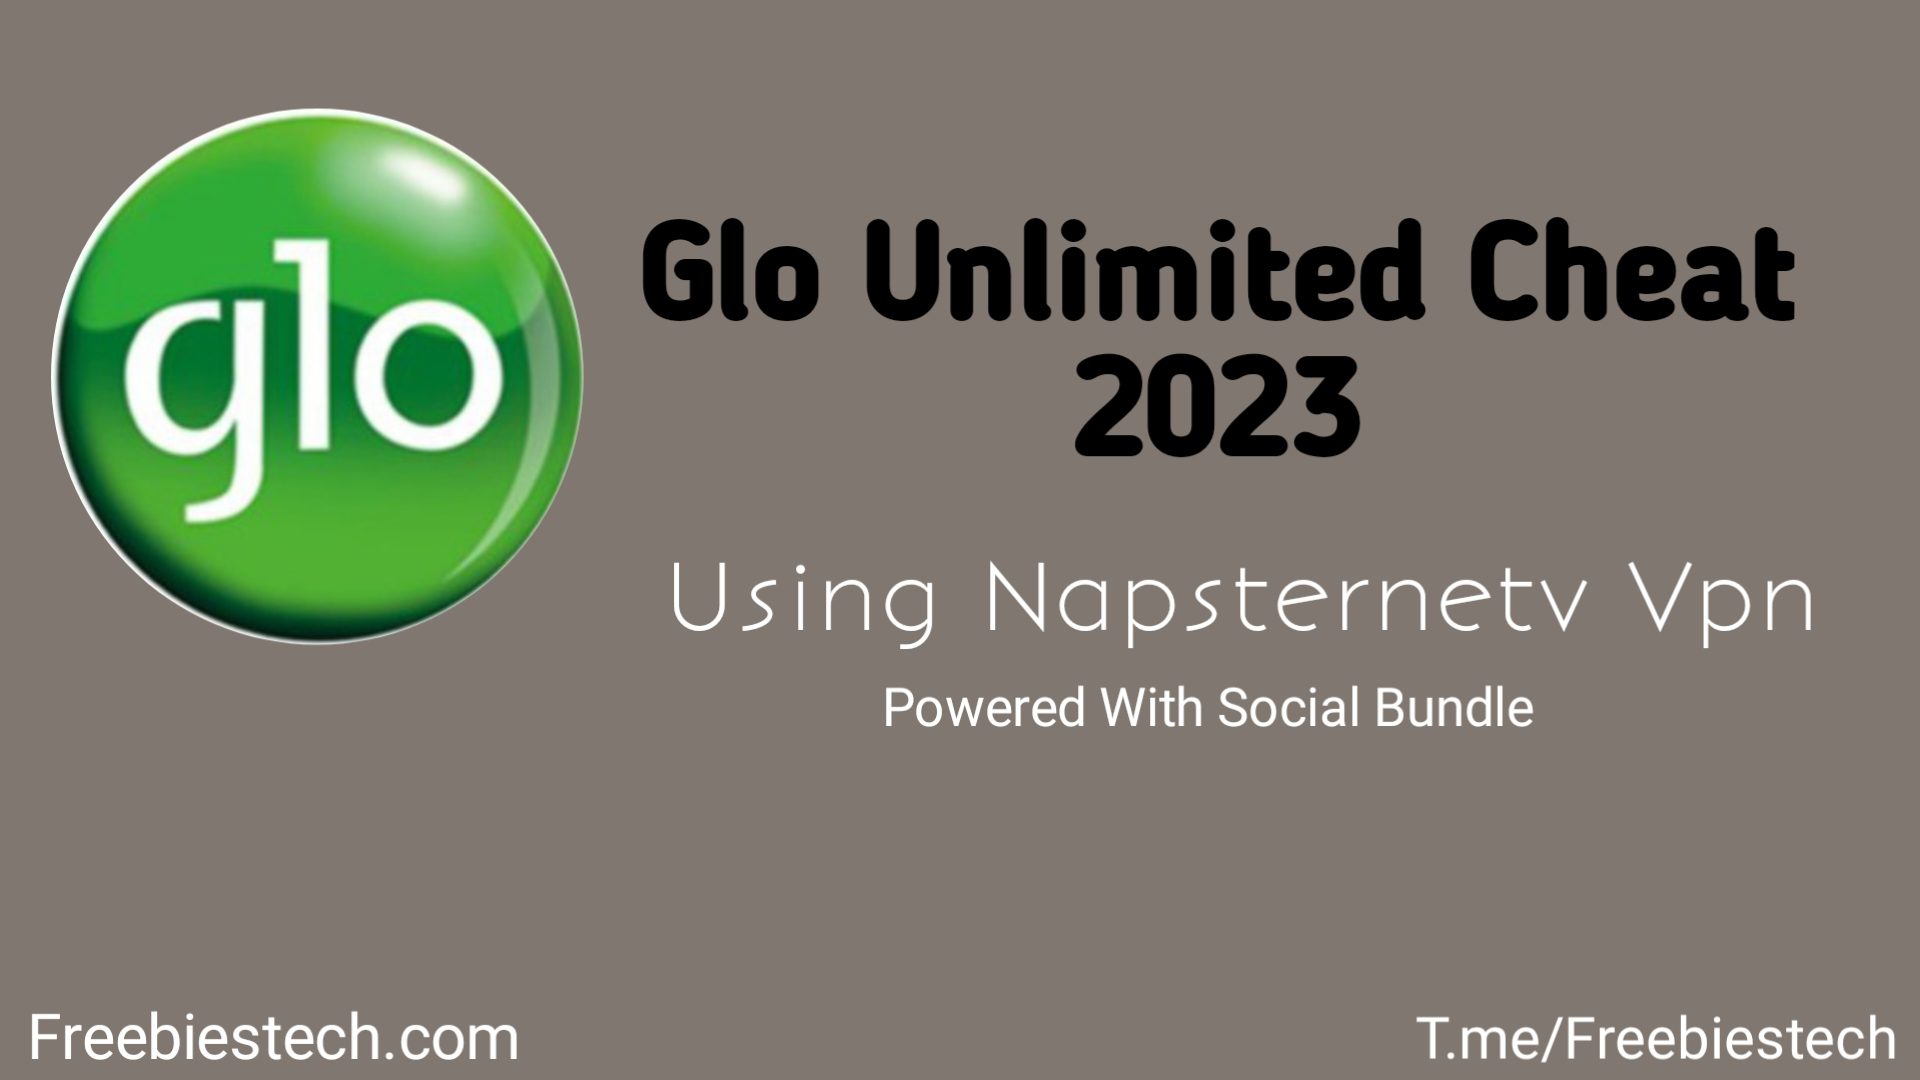 How to Activate Glo Unlimited Cheat using Napsternetv Vpn - 2023